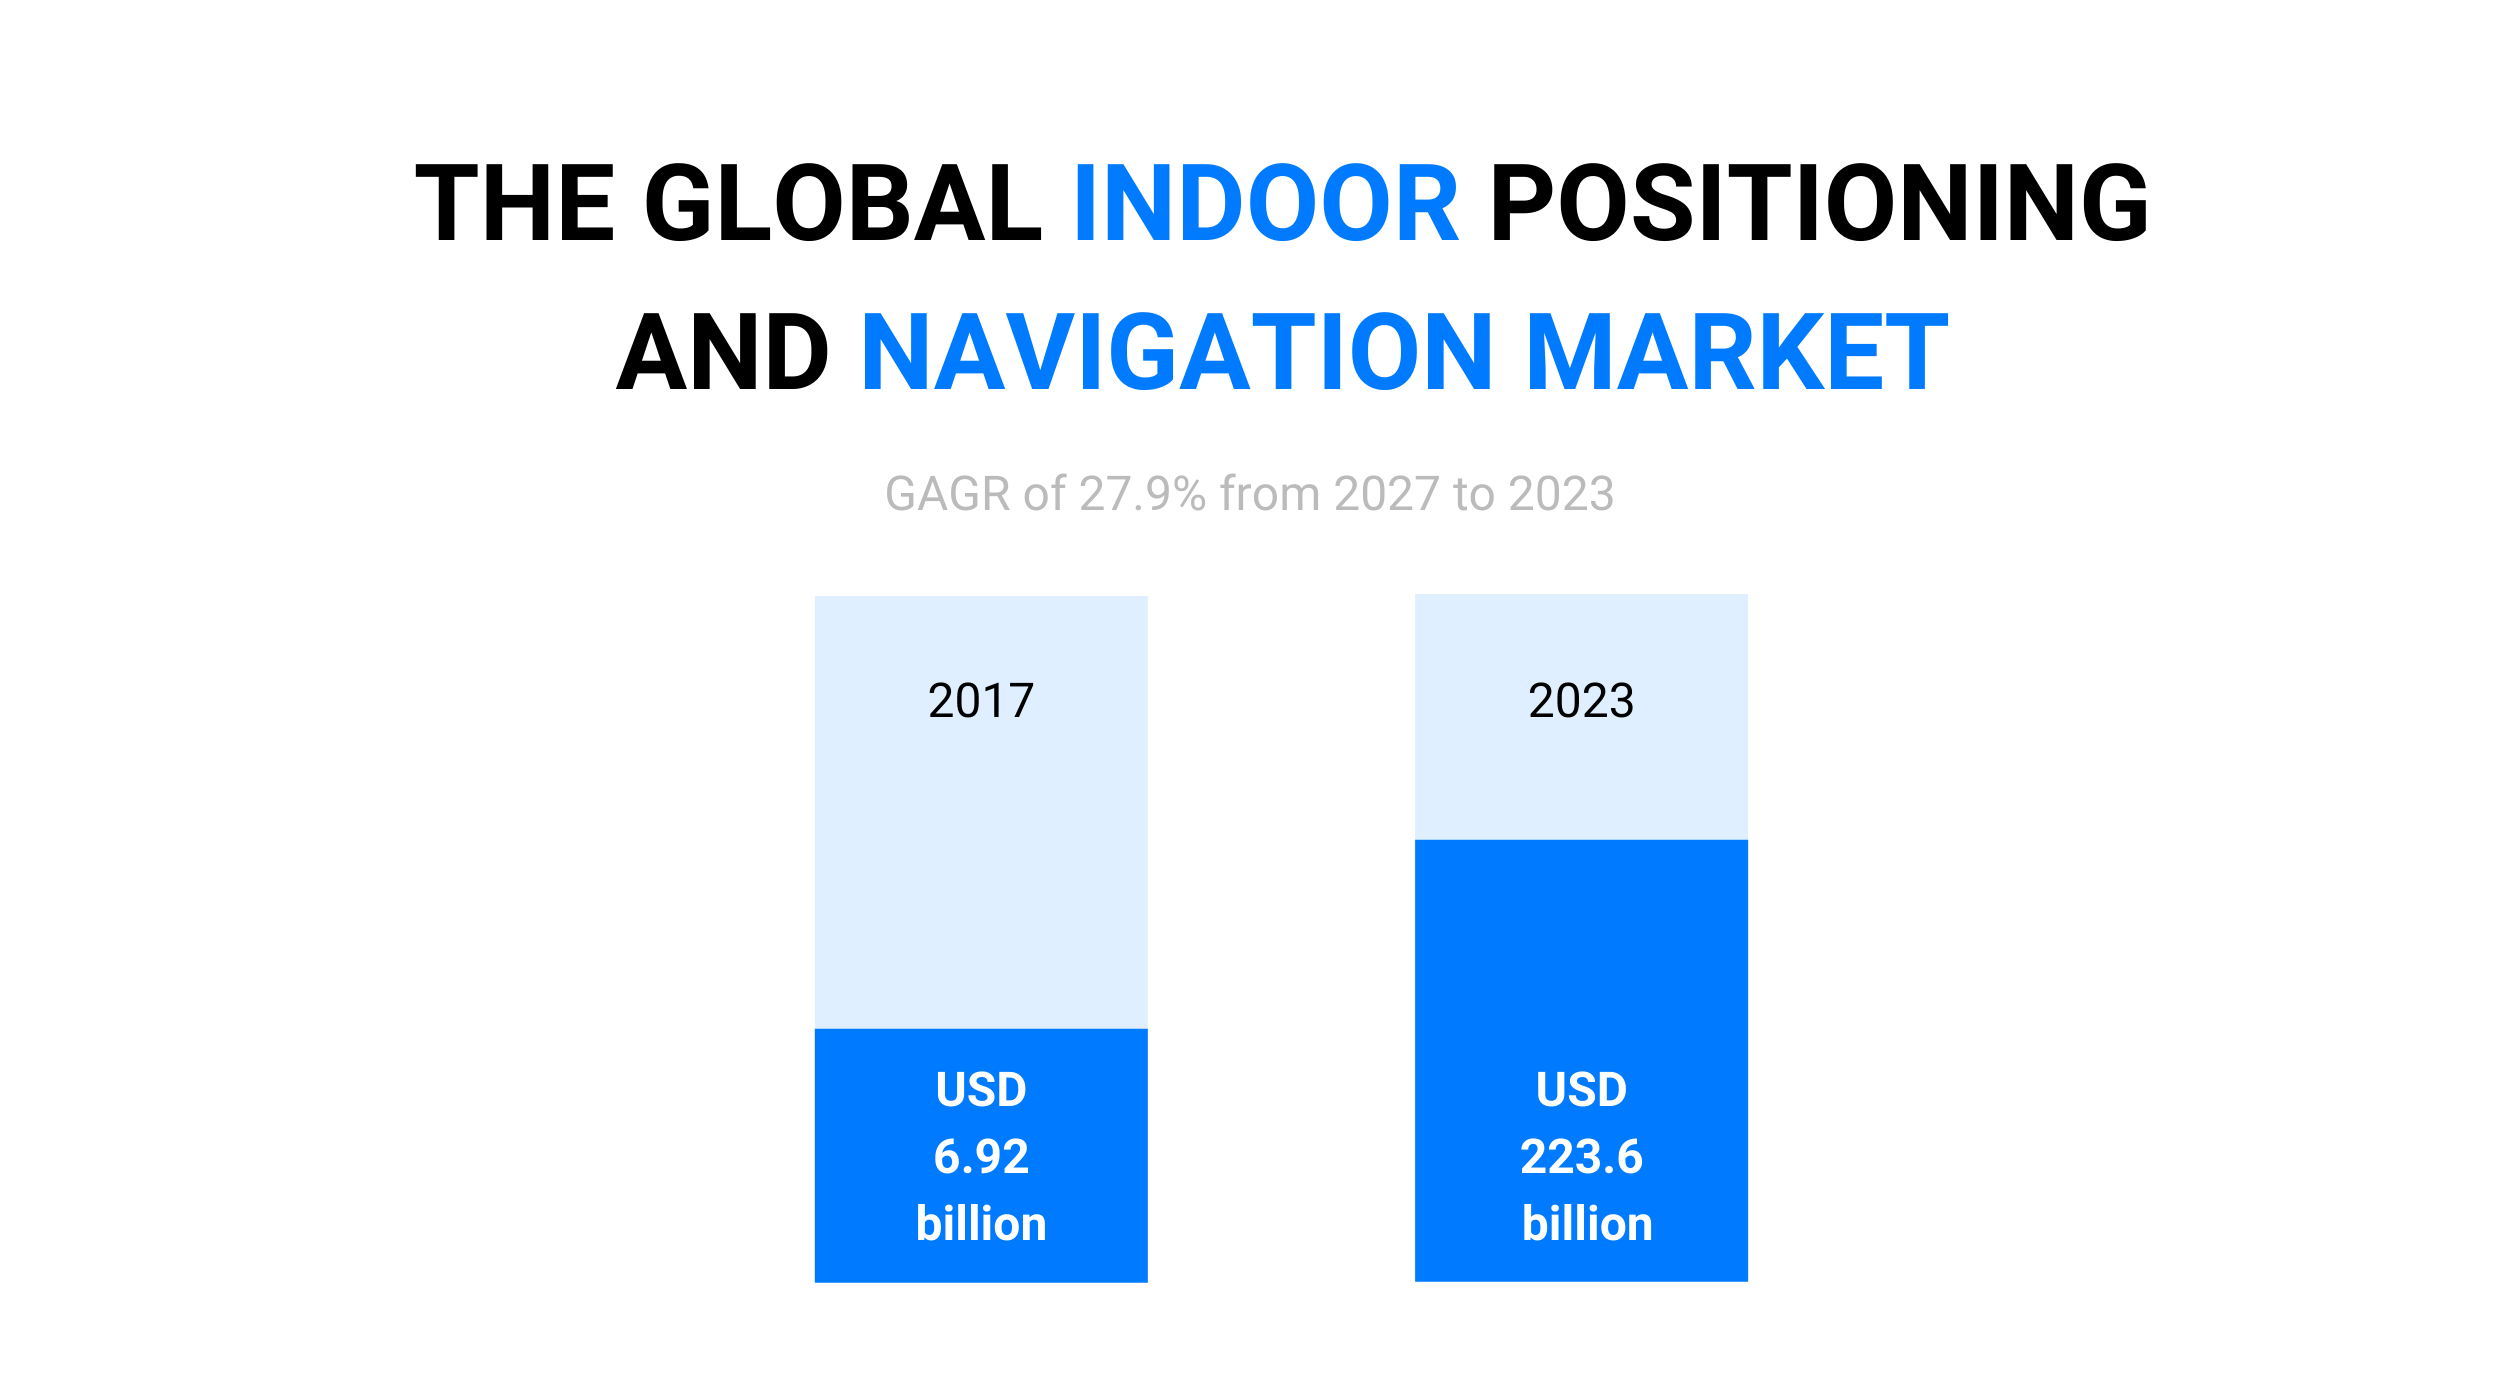 The global Indoor Positioning and Navigation market